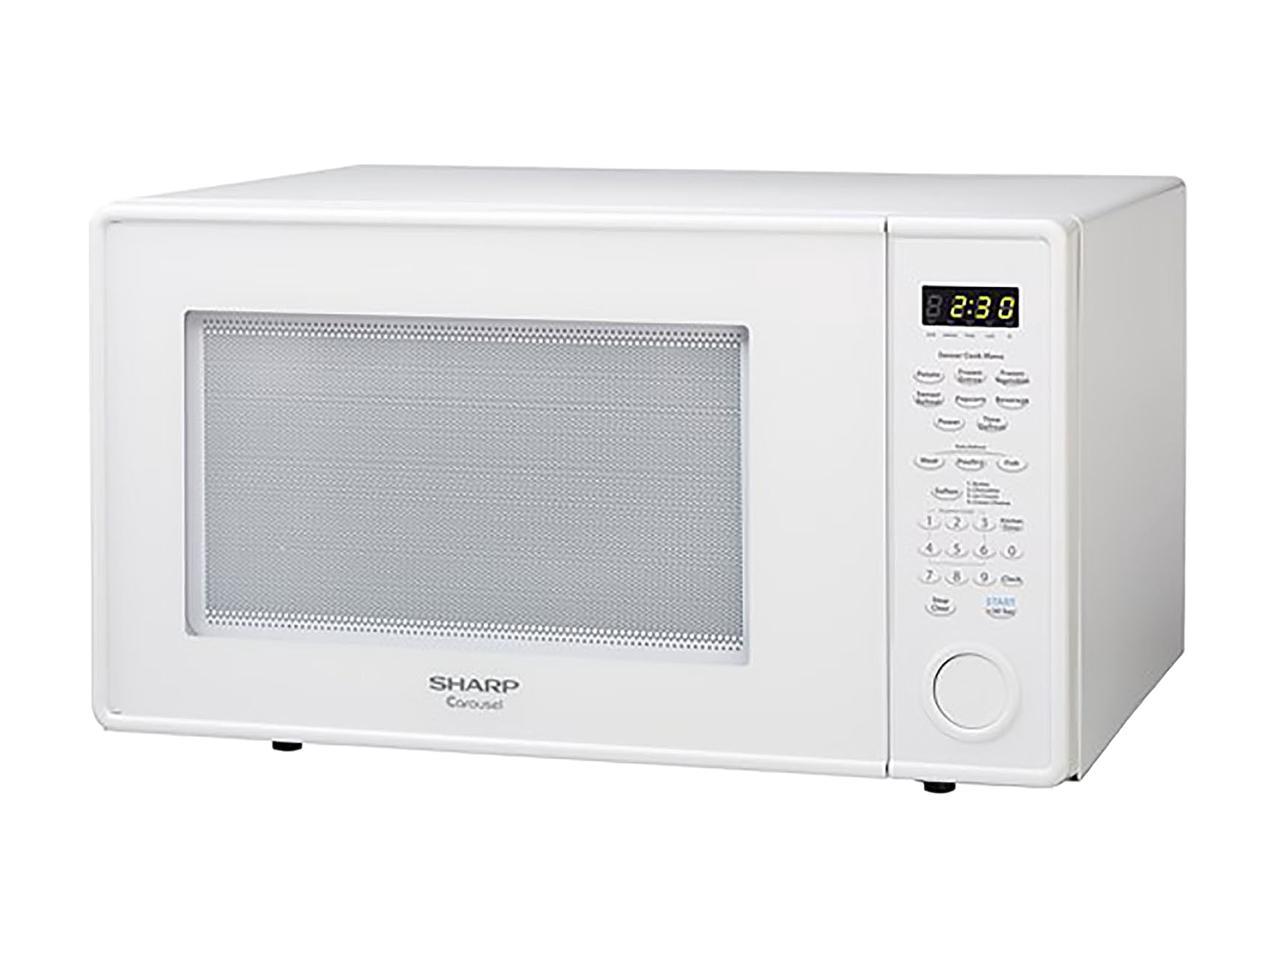 Sharp R559YW 1.8 cu. ft. Countertop Microwave Oven White